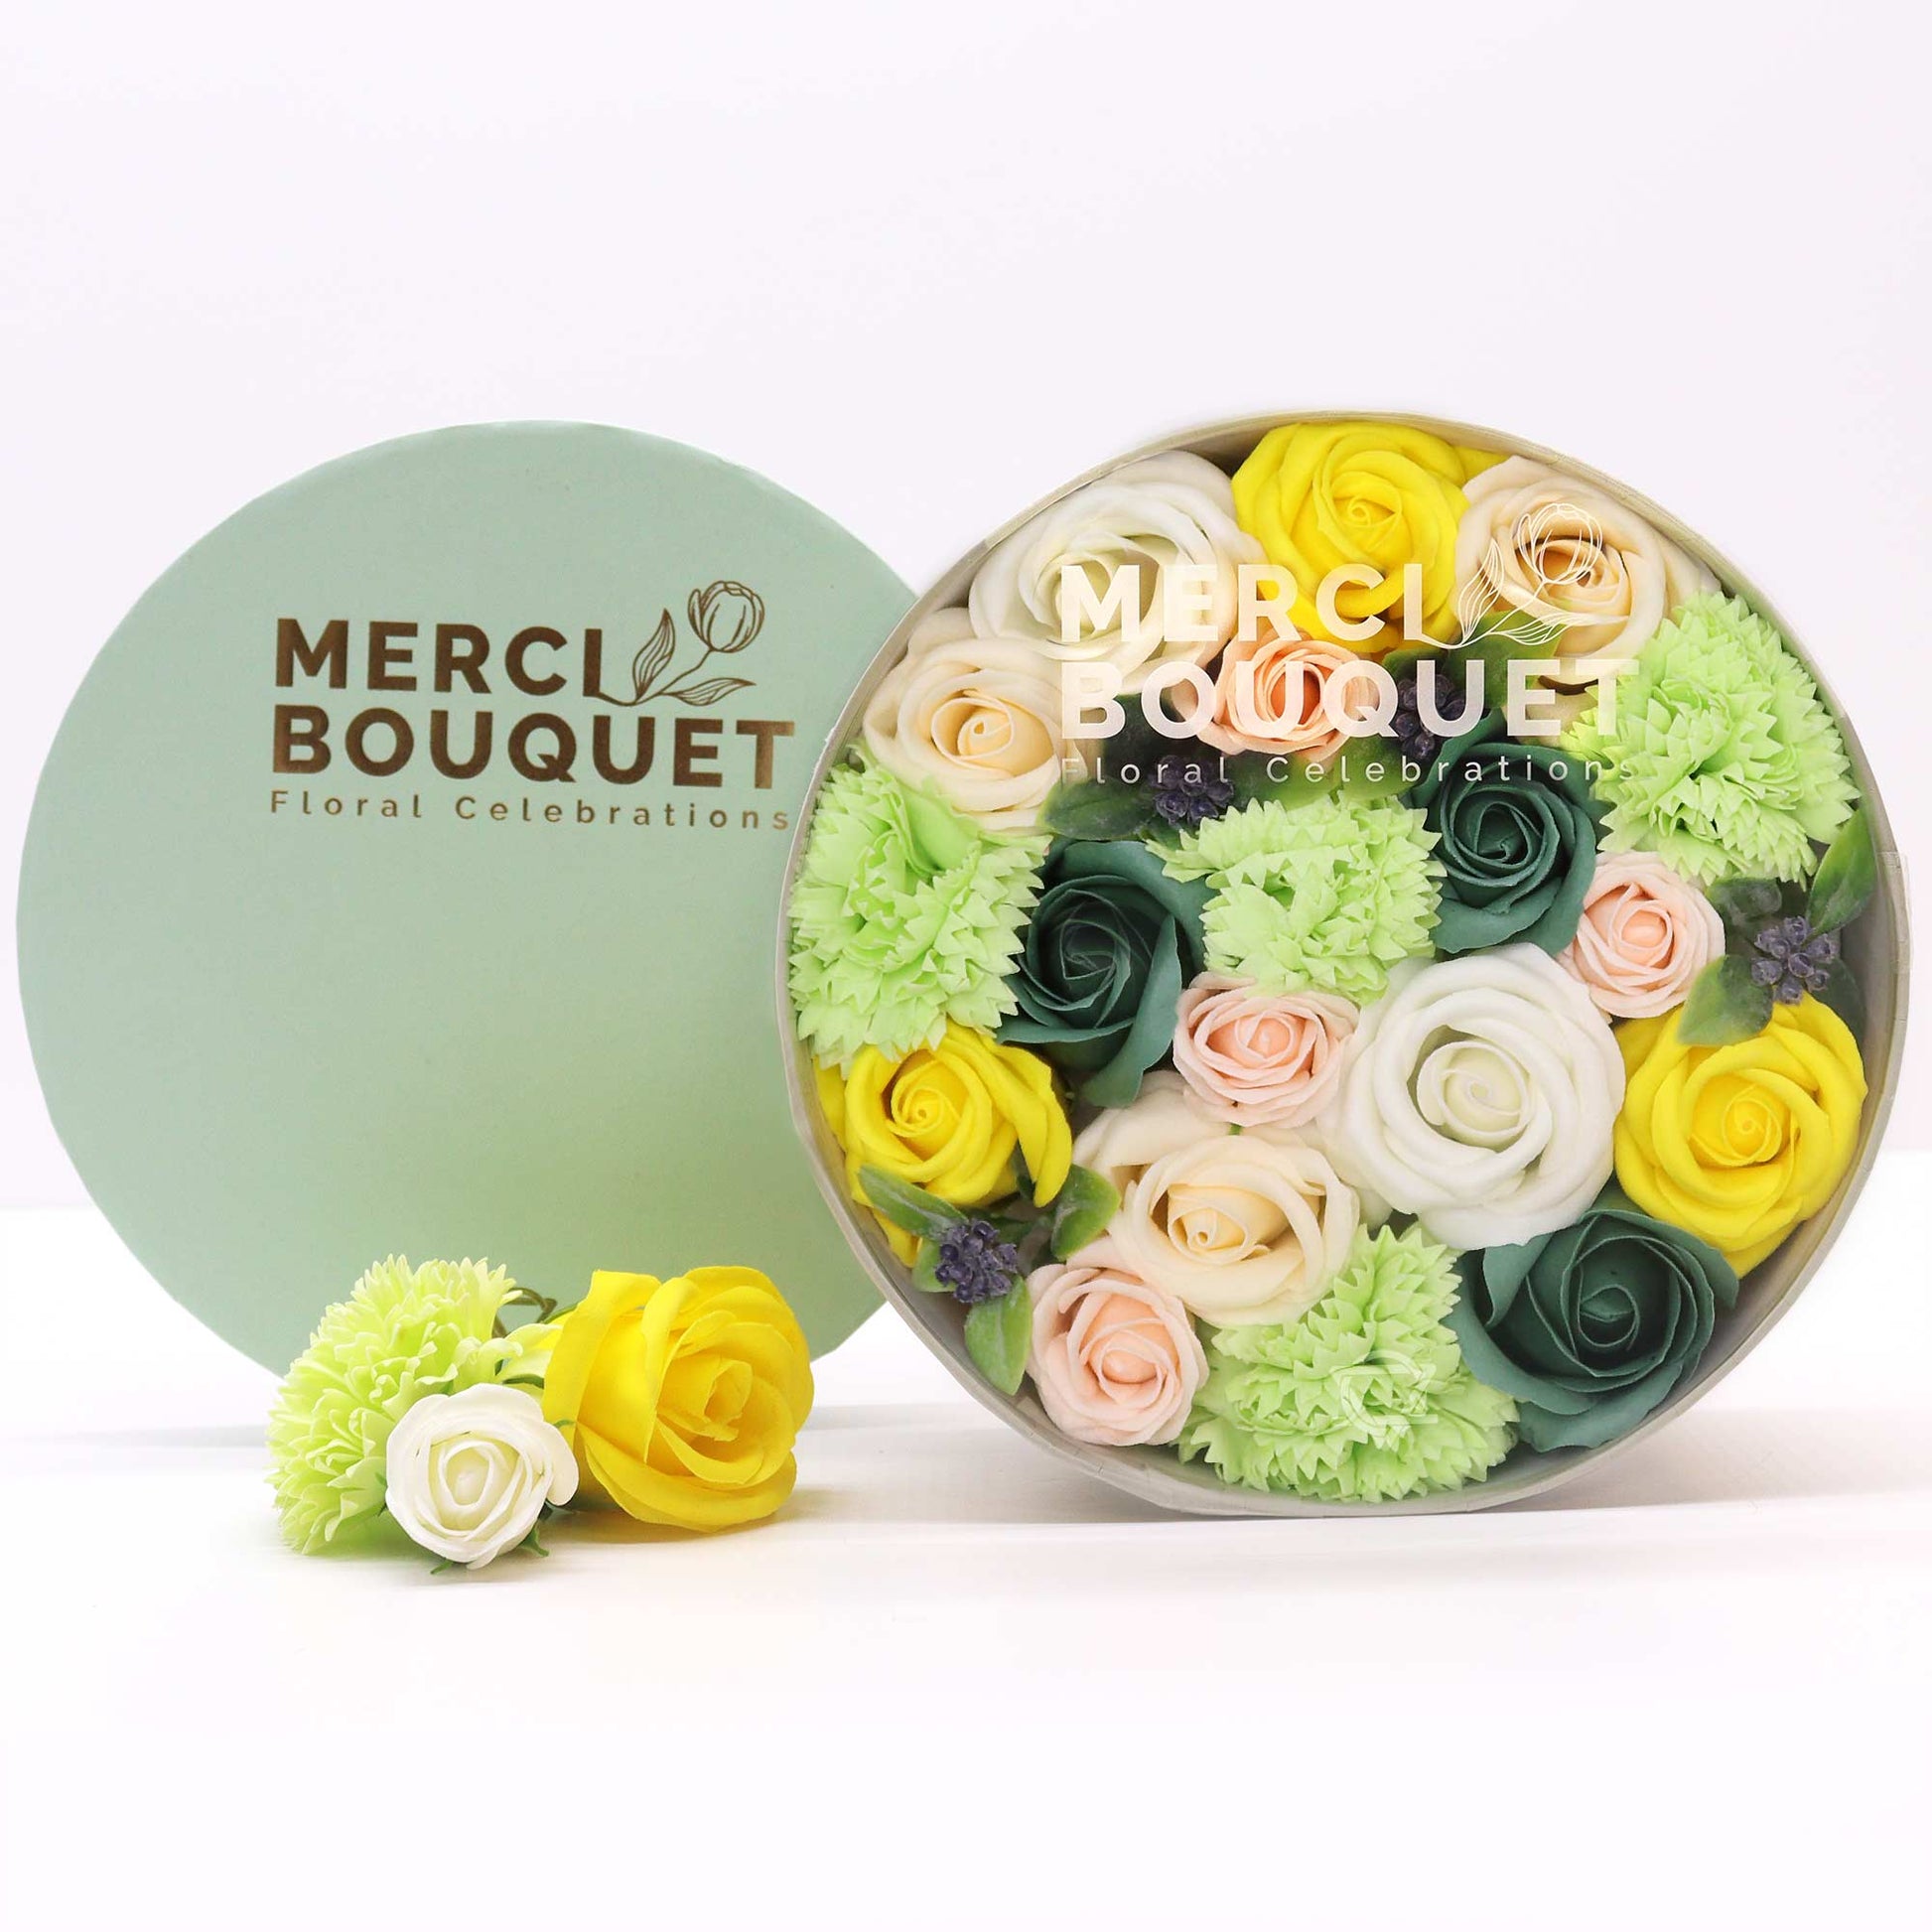 In a green hatbox named Merci Bouquet Floral Celebrations, this Soap Hat Box is full of Spring colours such as yellows, pinks, whites and greens. A scented gift perfect for a home spa experience.